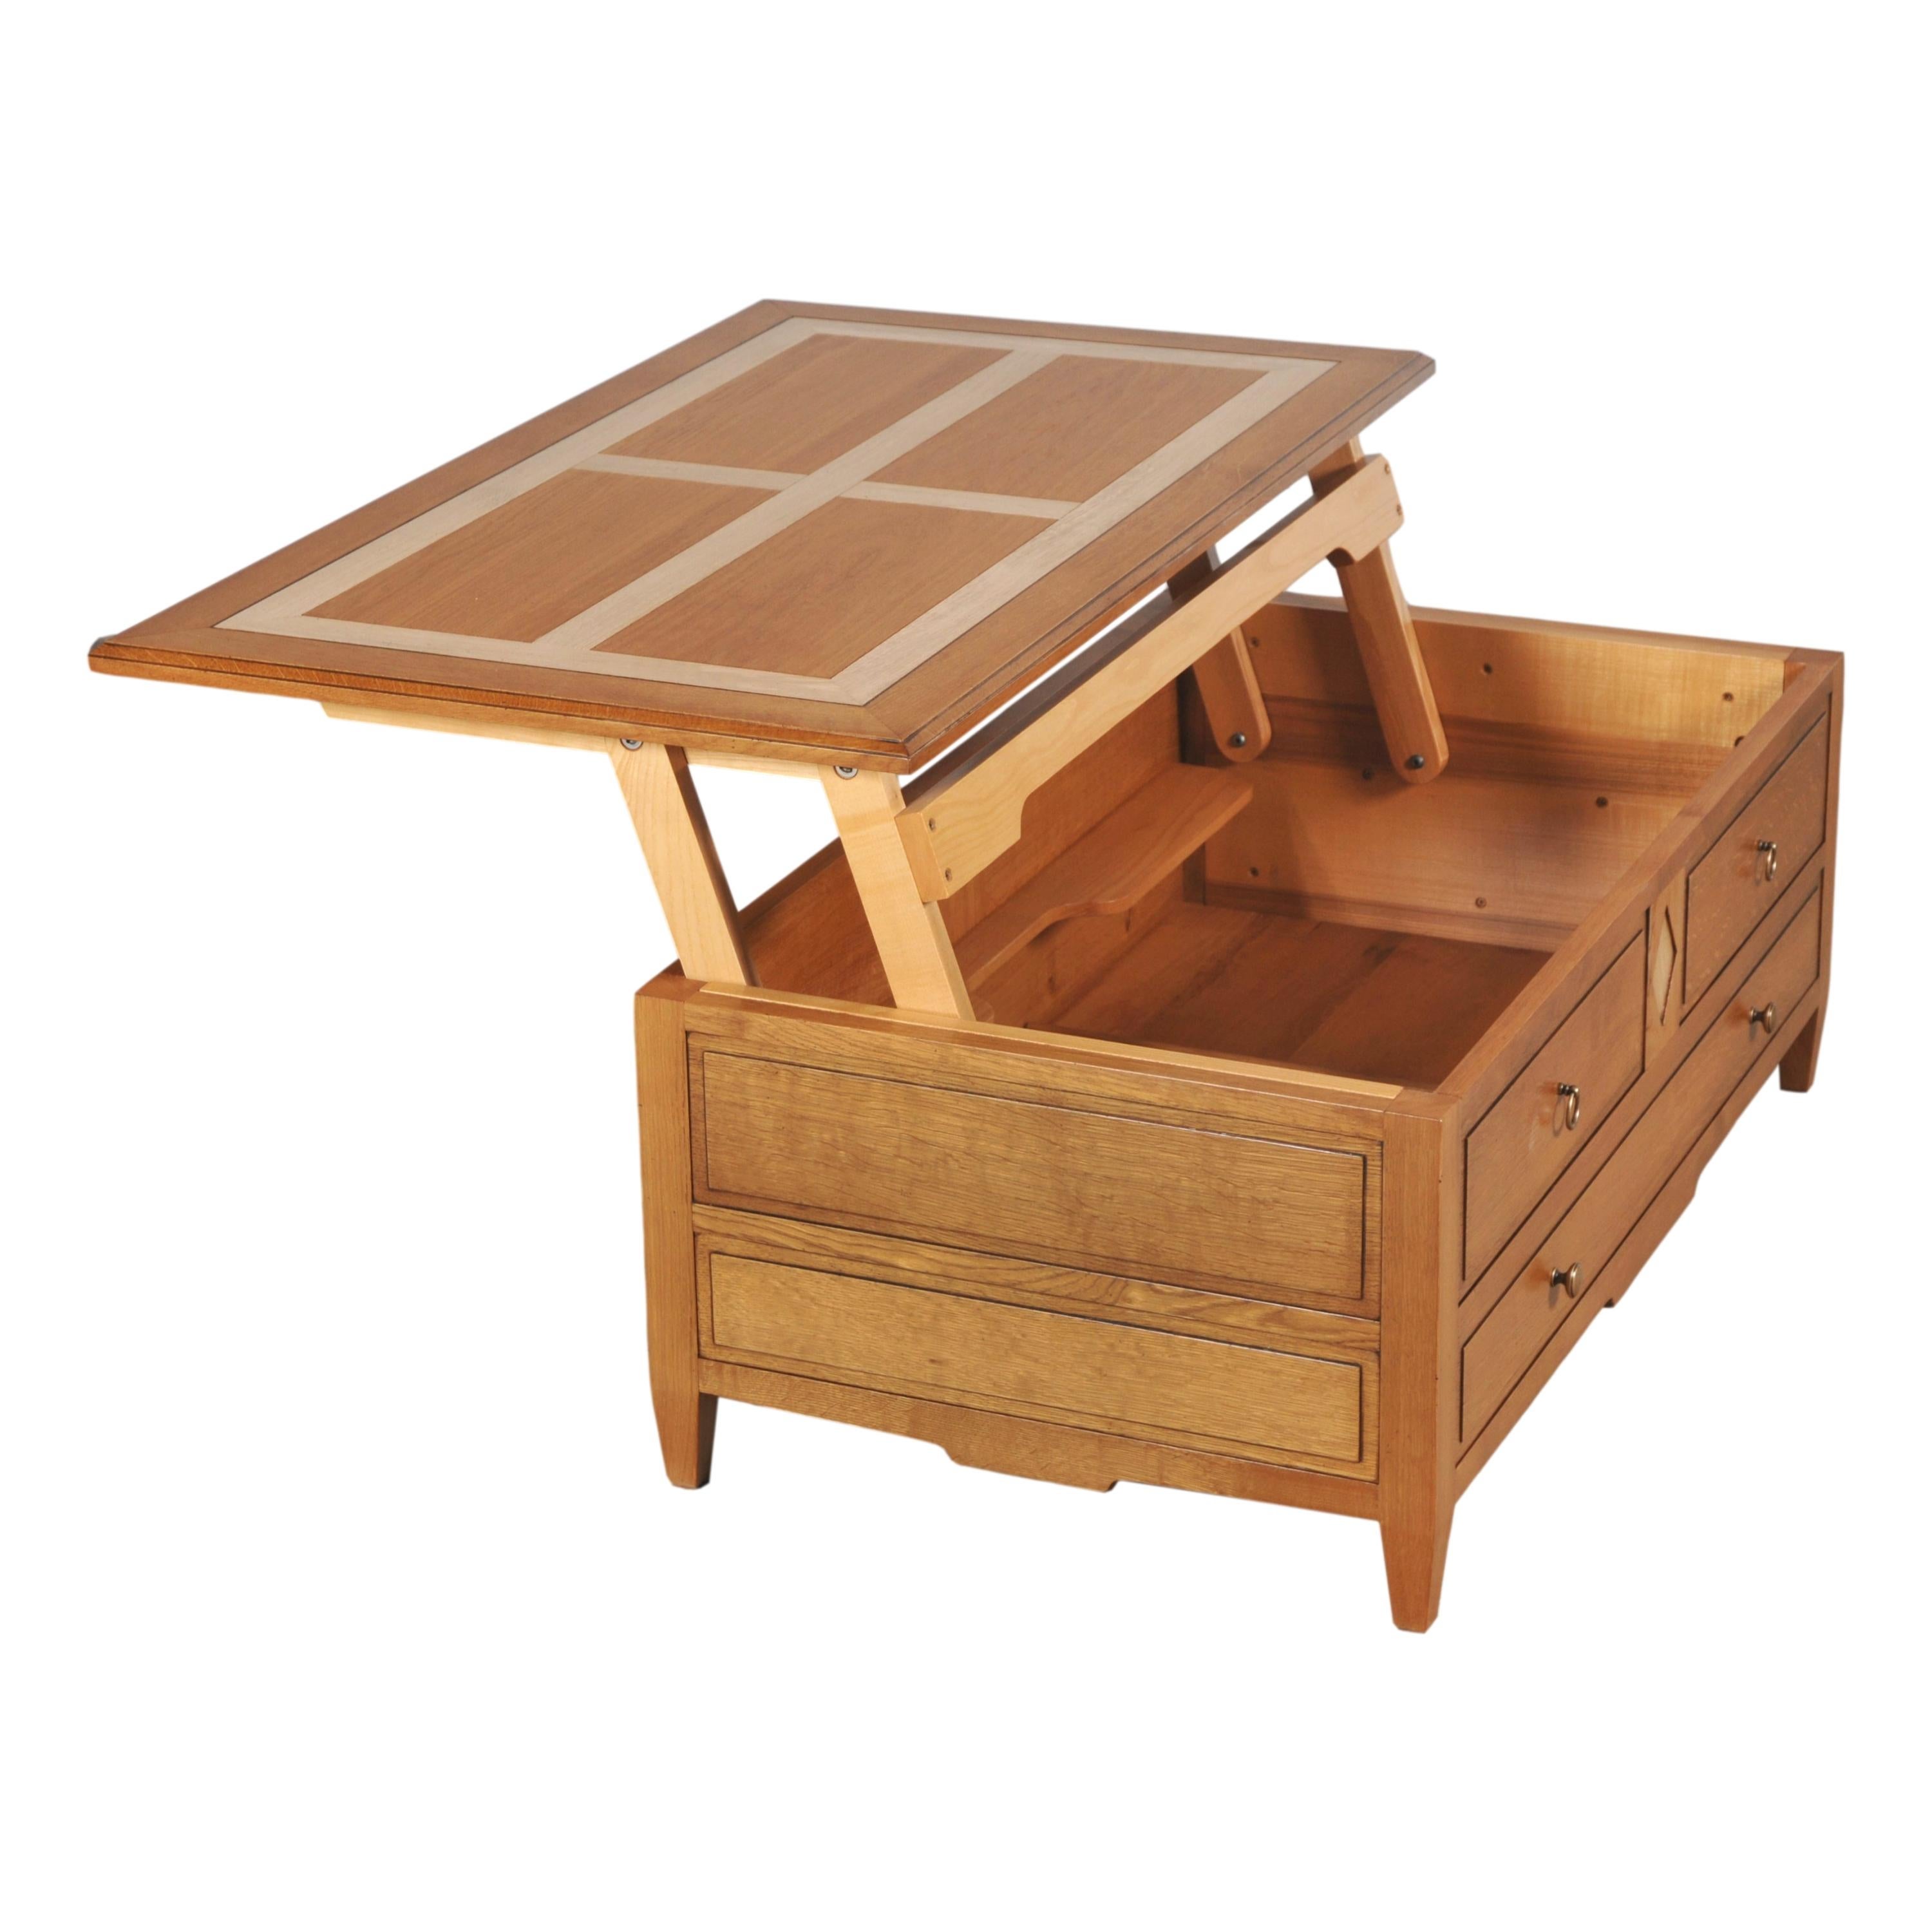 Hand-Crafted Liftable coffee table for TV diners in solid oak, storage for bottles & glasses For Sale